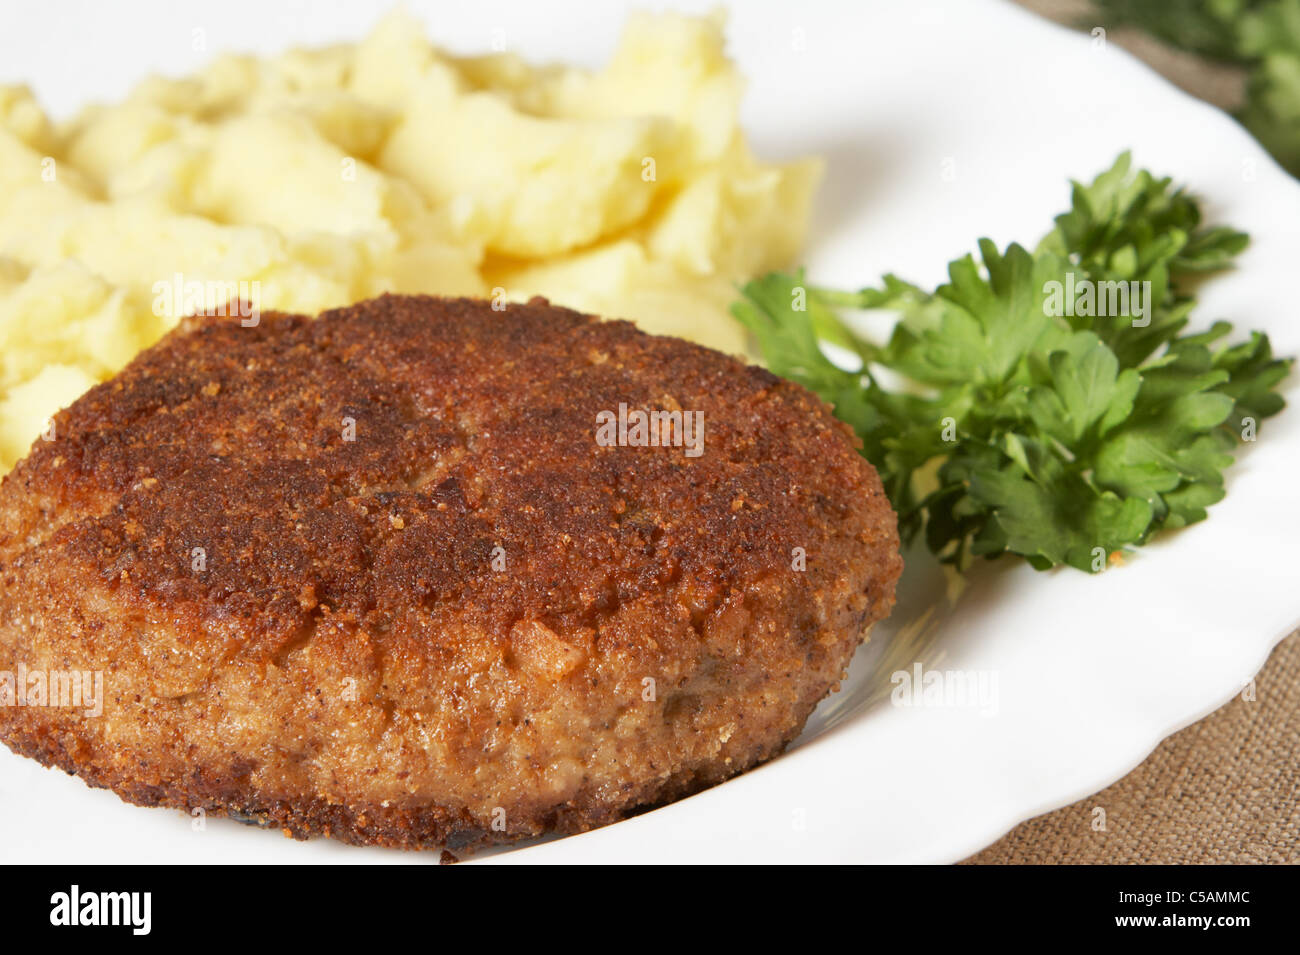 Cutlet Stock Photo